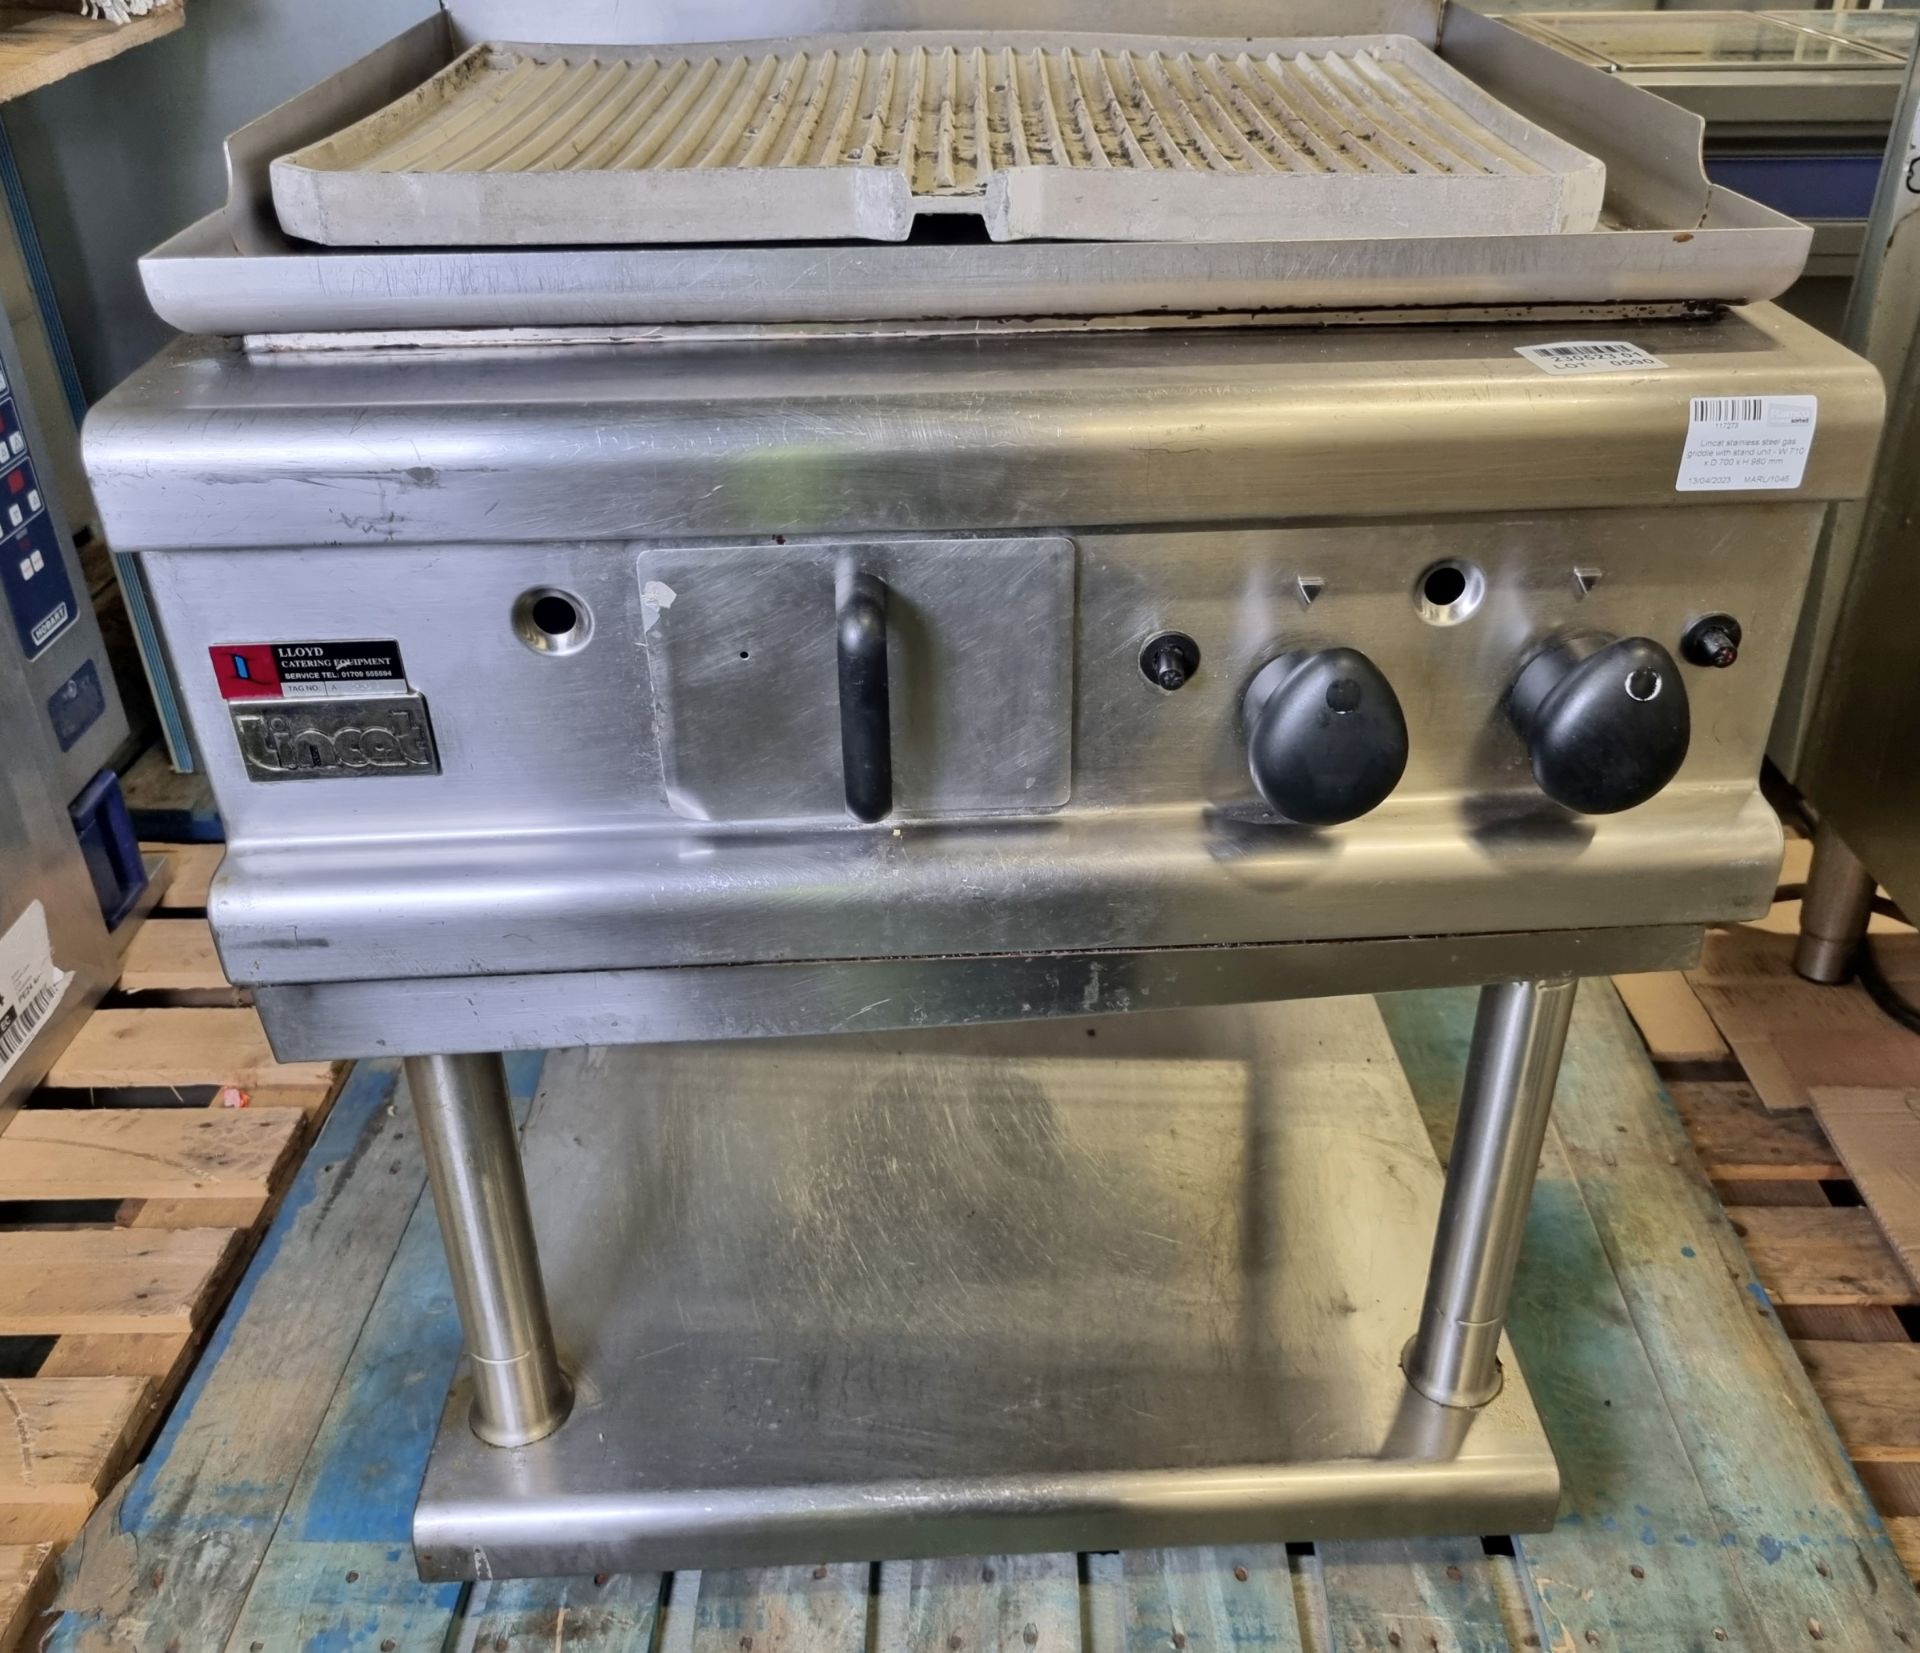 Lincat stainless steel gas griddle with stand unit - W 710 x D 700 x H 980 mm - Image 6 of 6